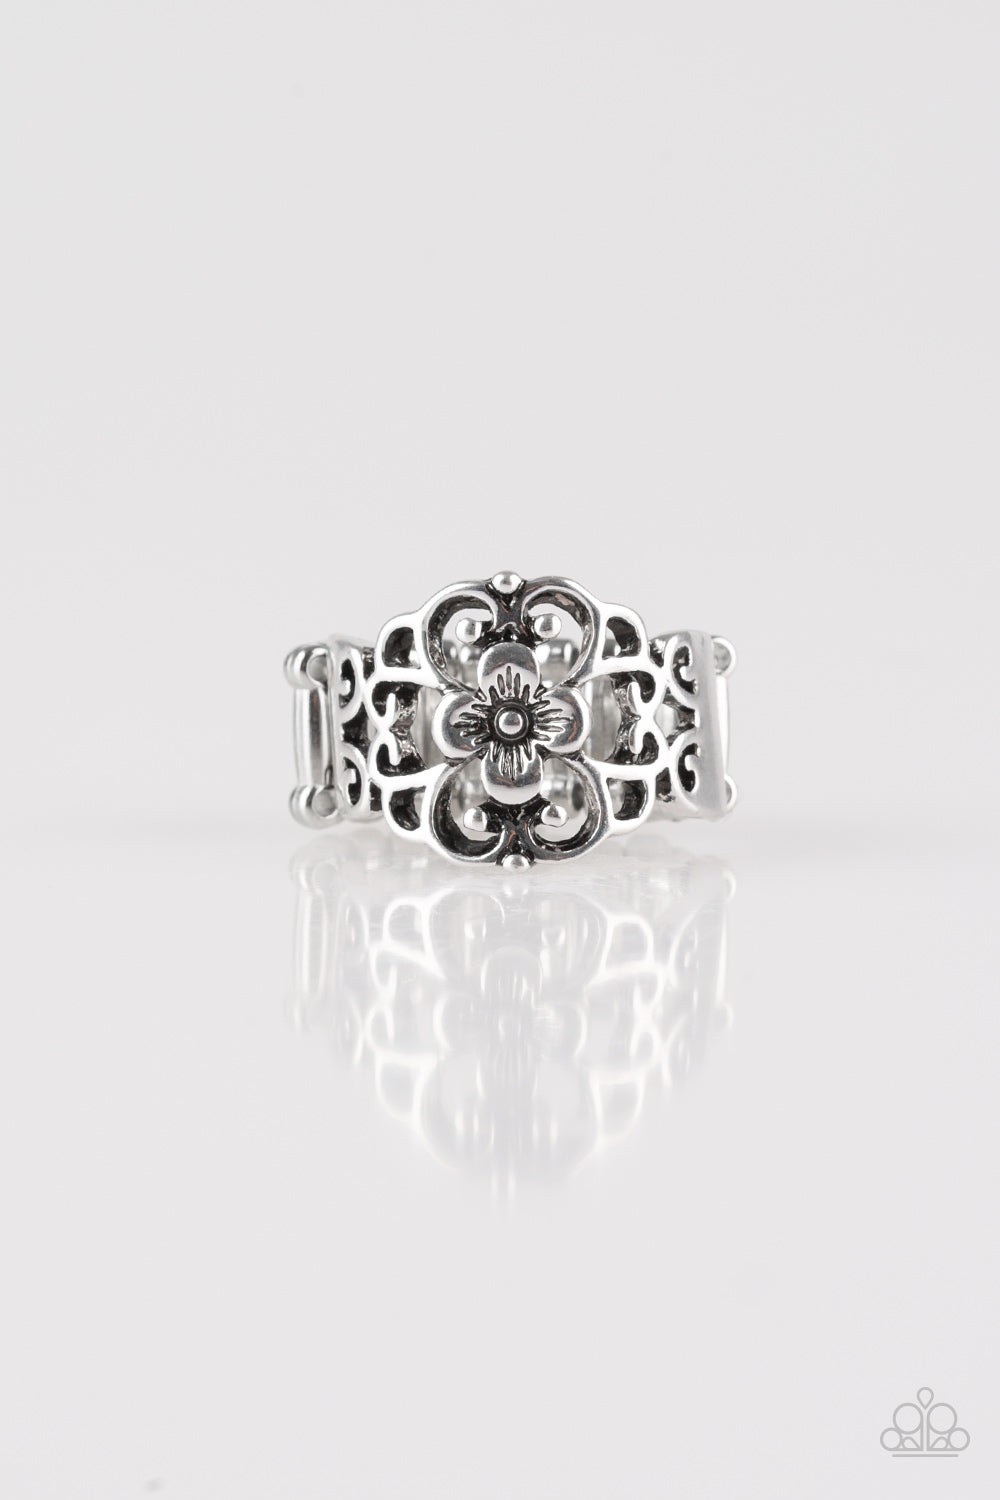 Paparazzi Accessories Fanciful Flower Gardens - Silver Ring